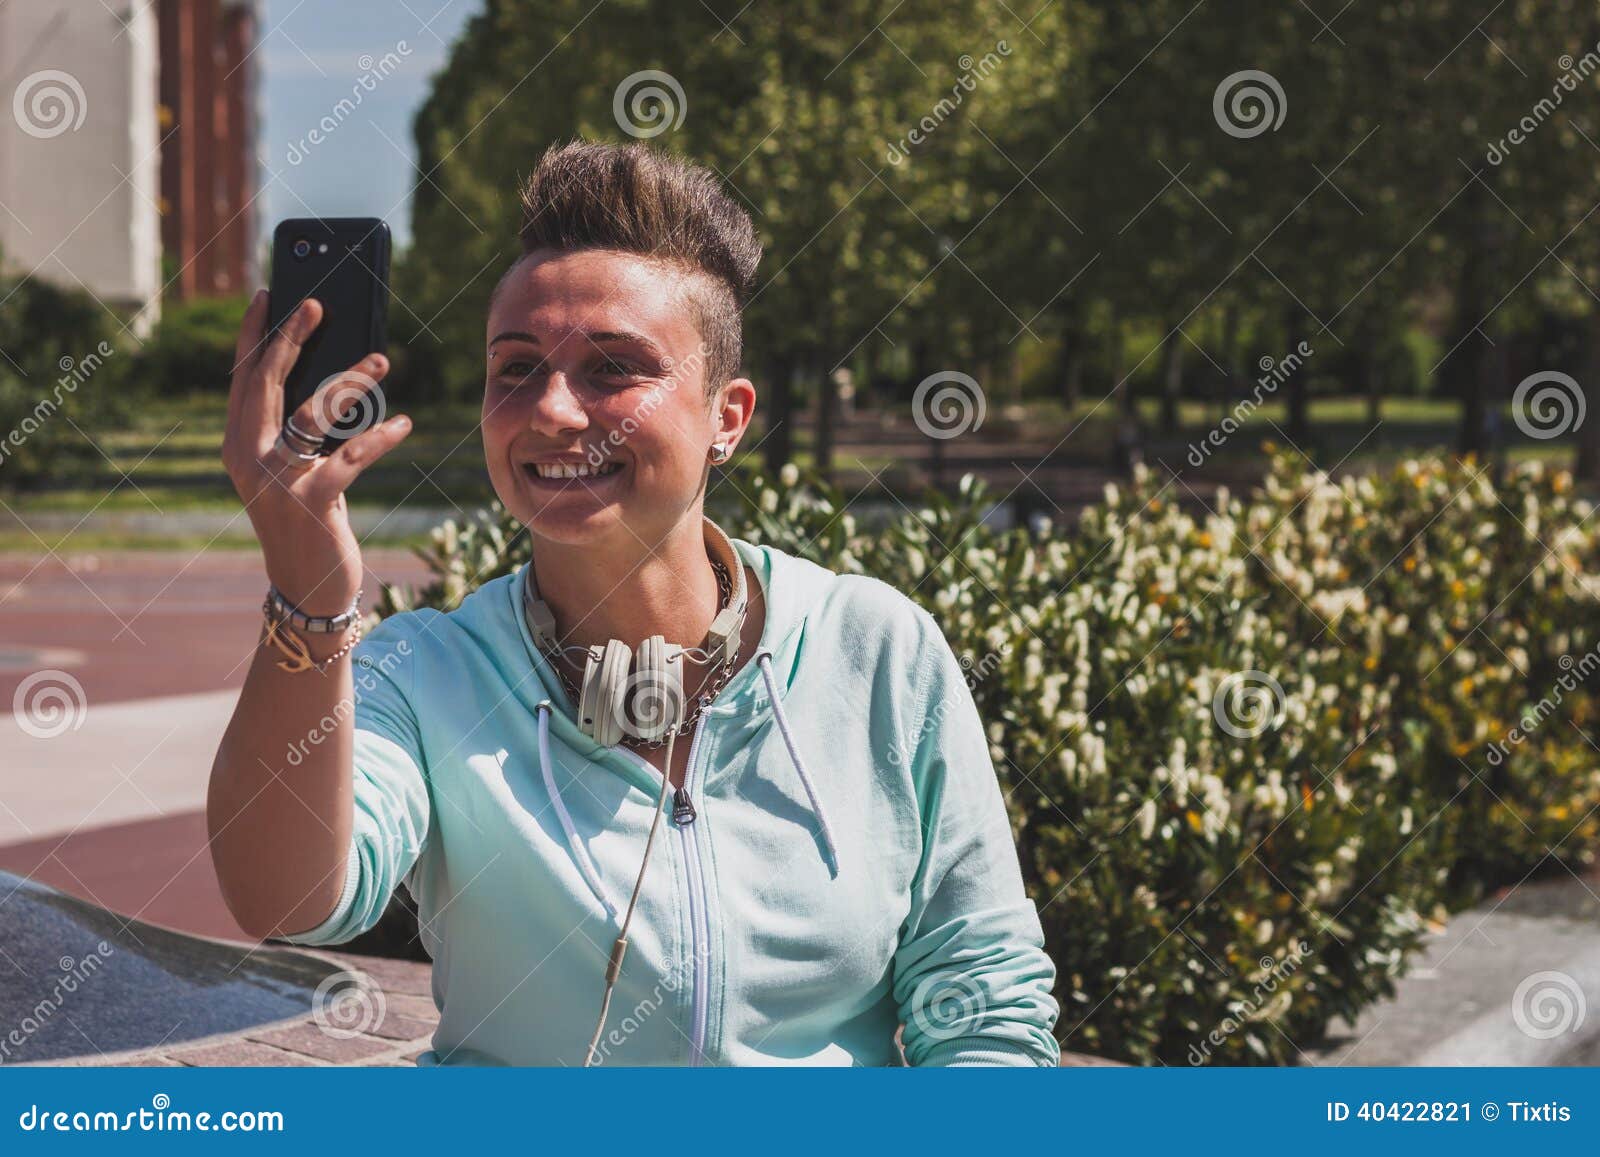 Portrait Of A Short Hair Girl Taking A Selfie Stock Image